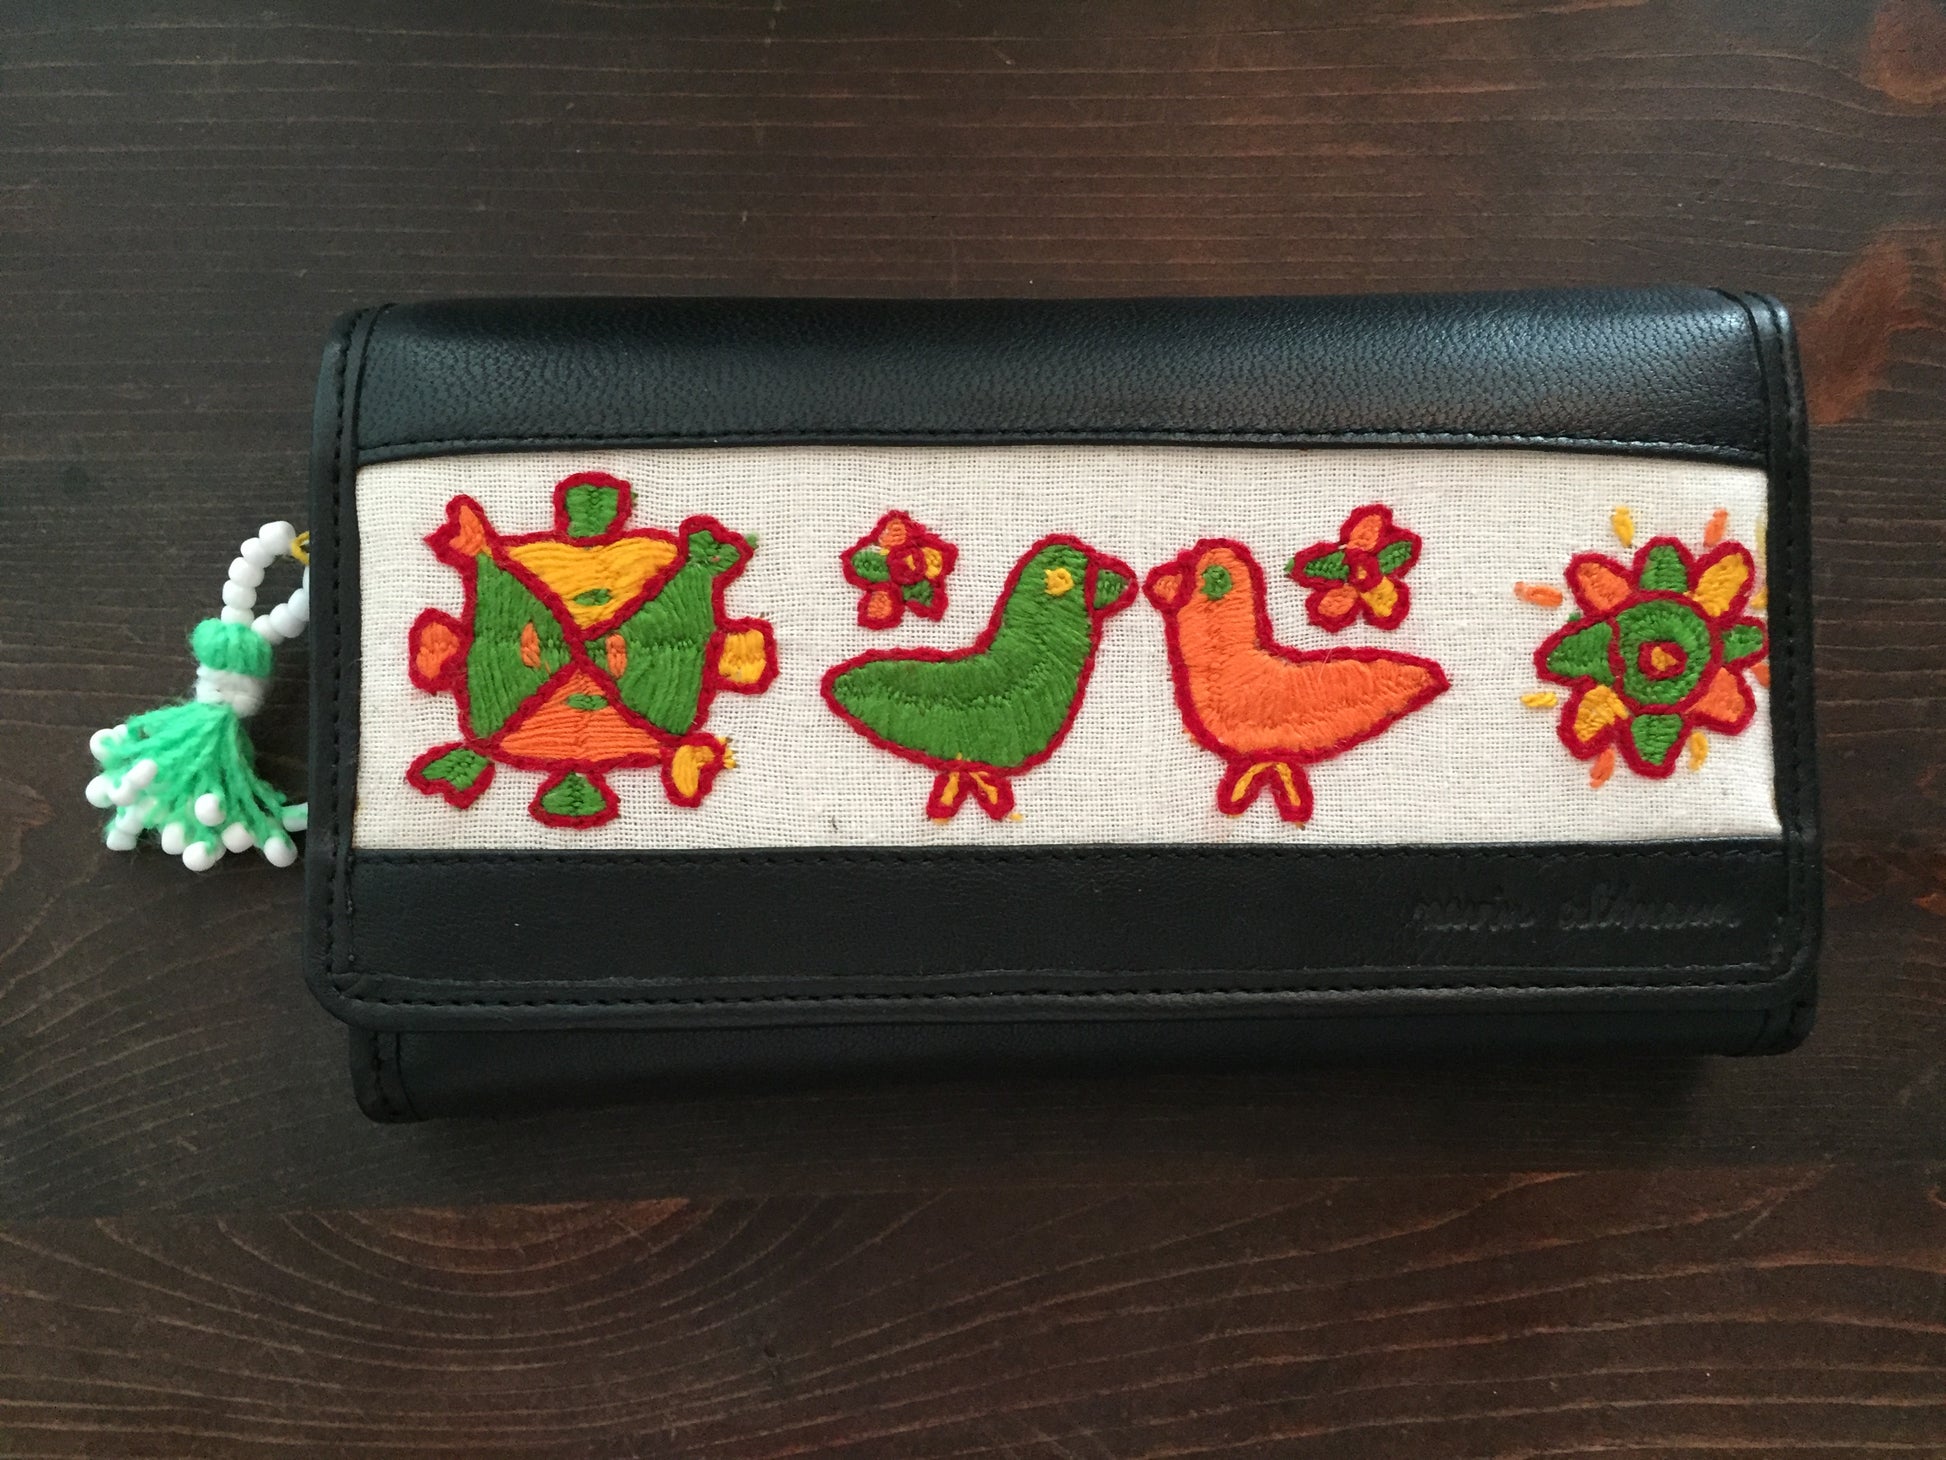 Handmade Leather Wallet with Hand Embroidery - Large - Dandarah